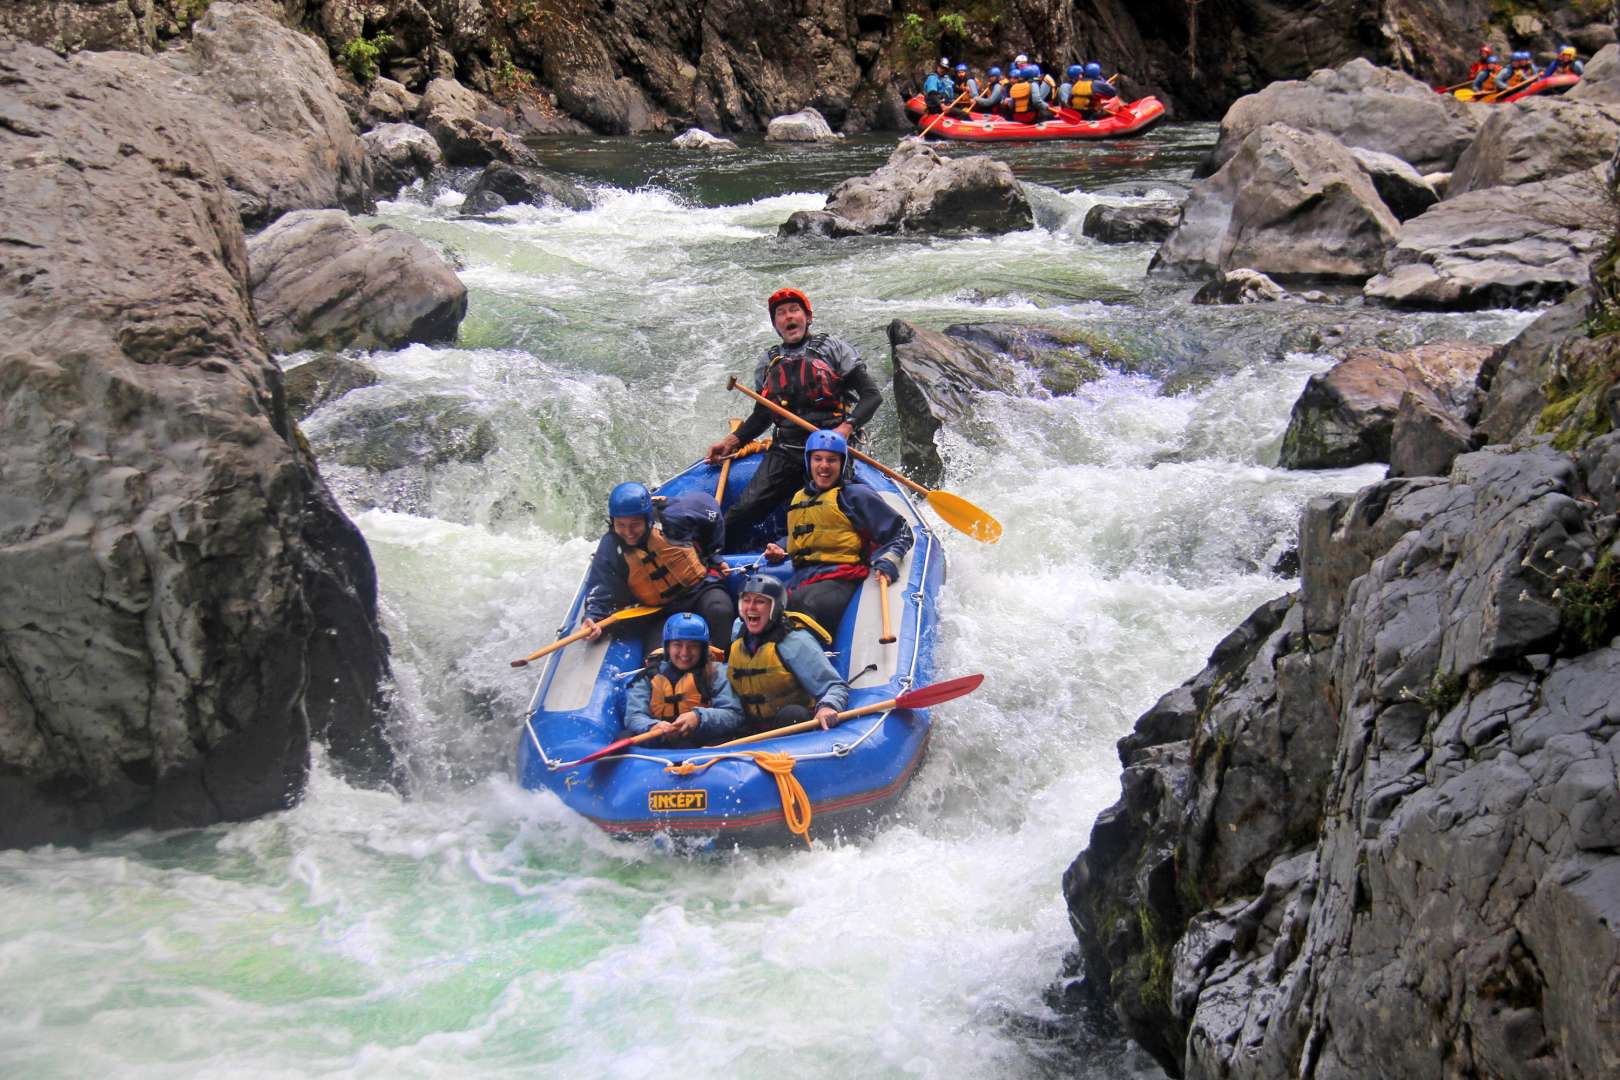 Rangitikei River Rafting with Rapids ranging from grade 1-5